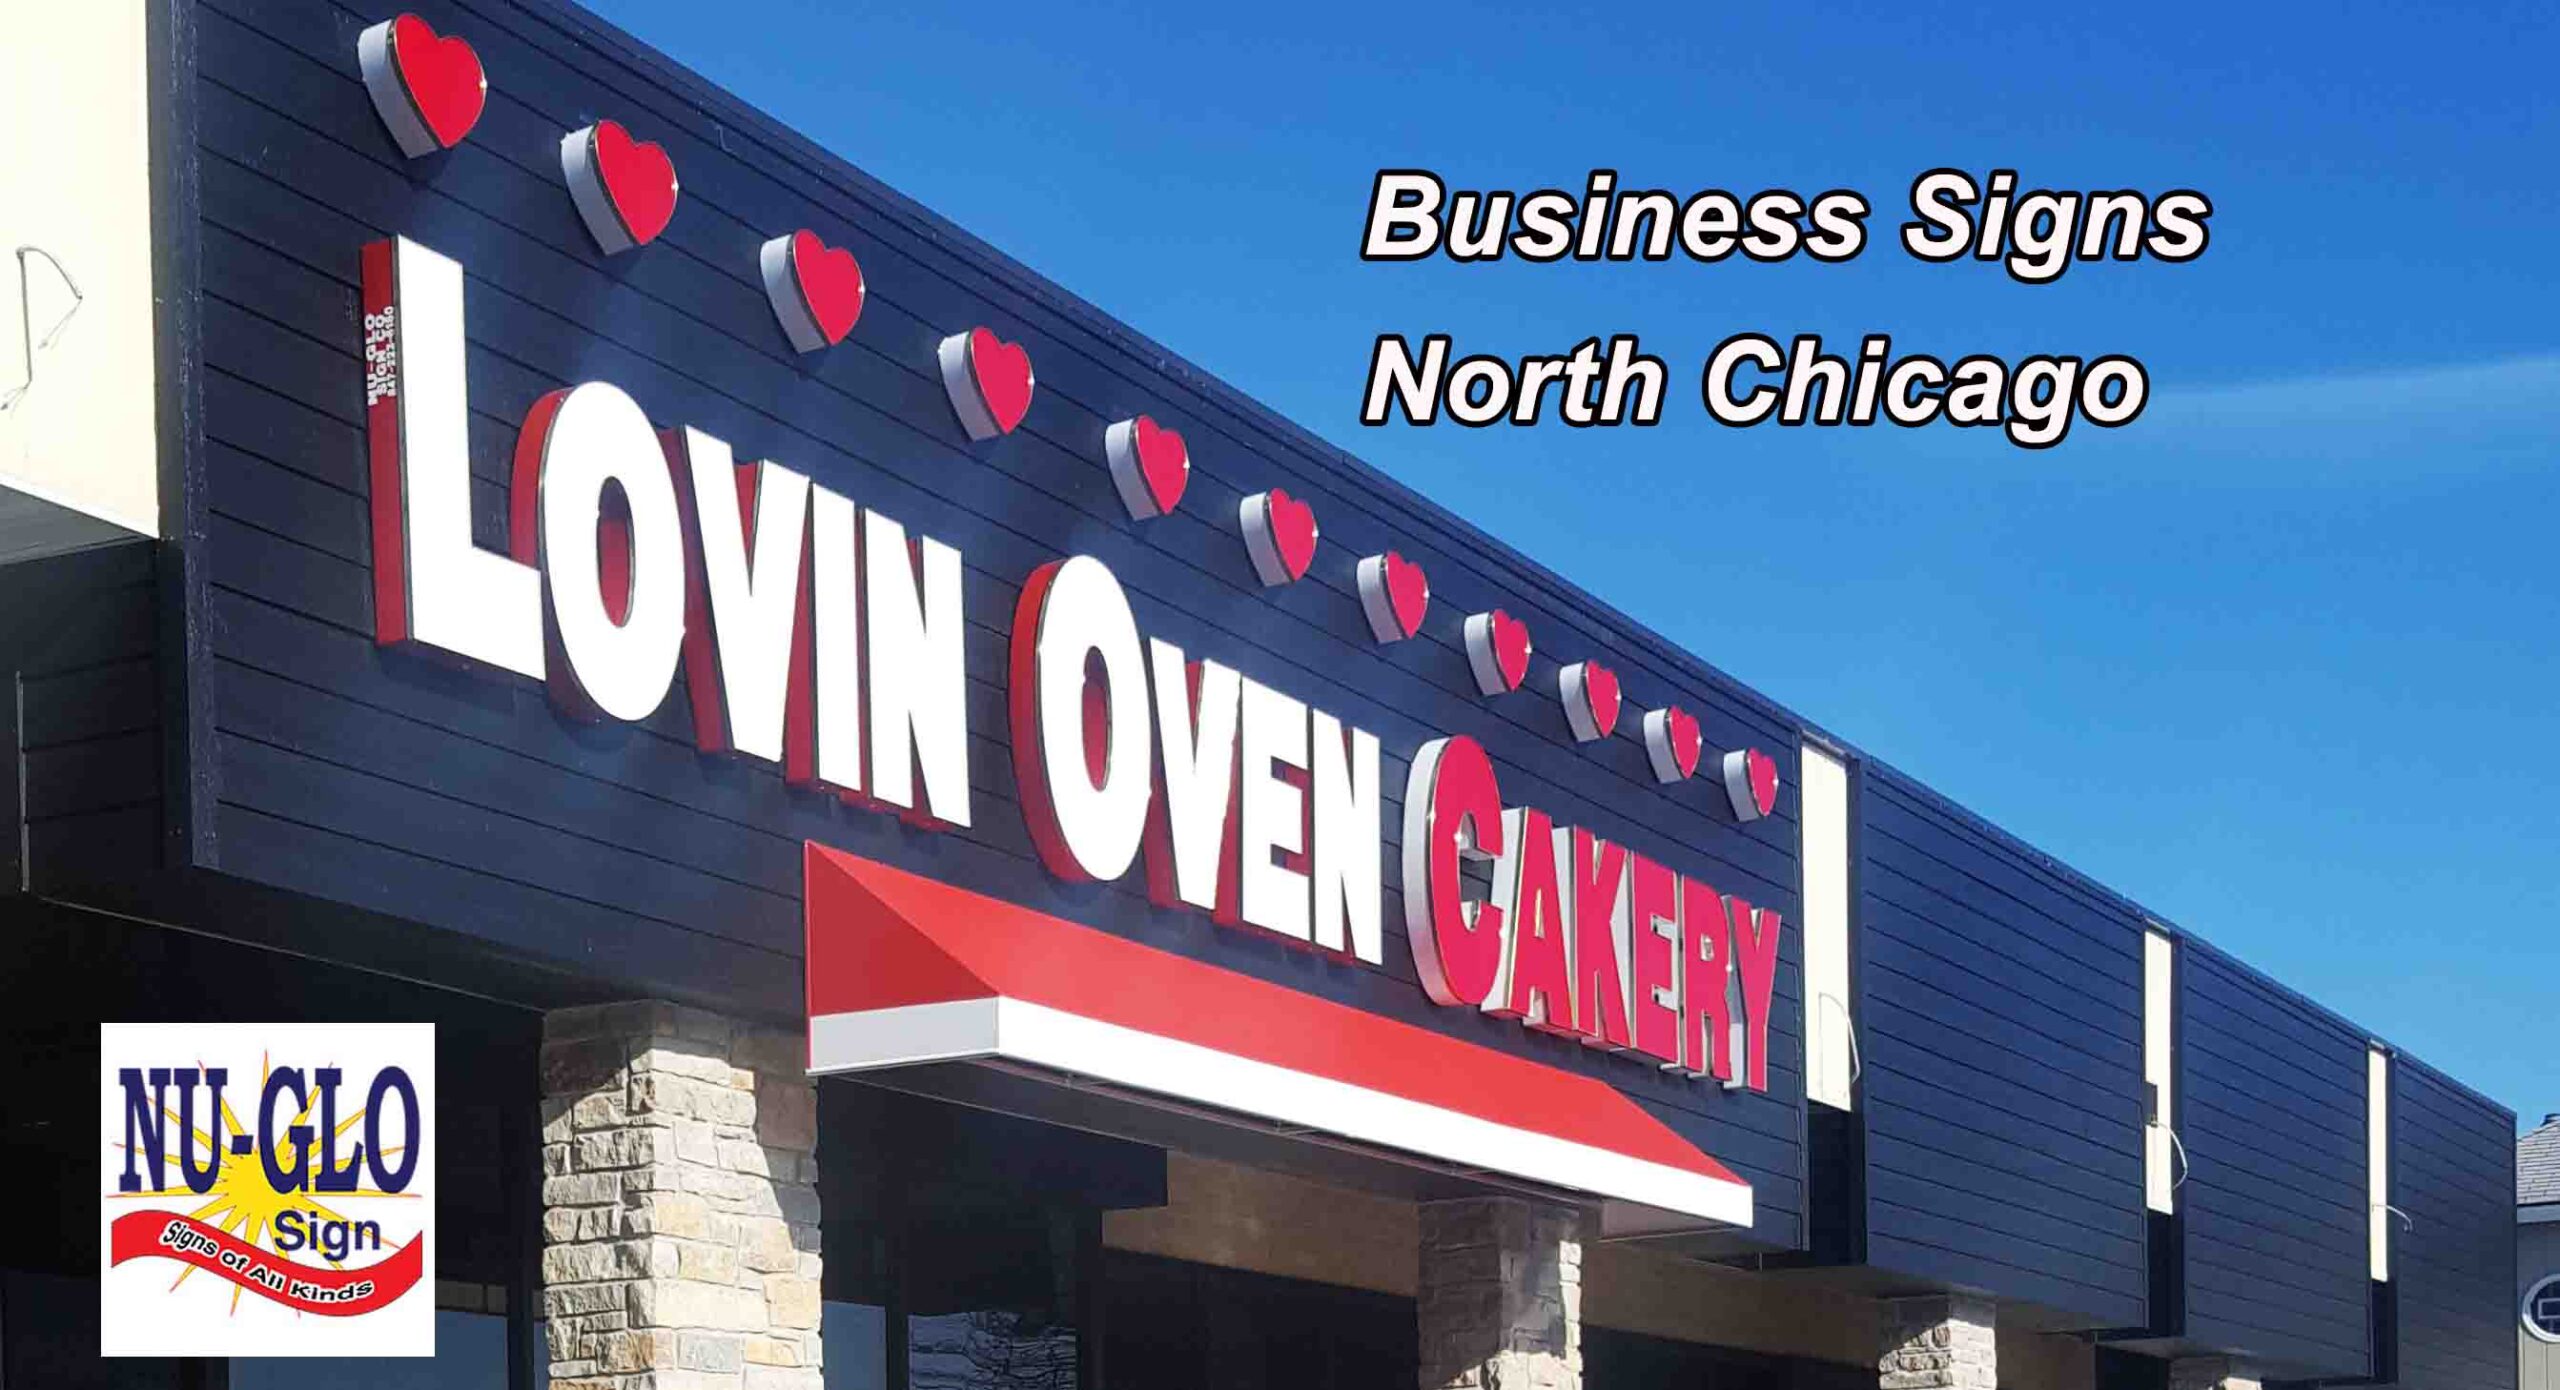 Business signs - North Chicago